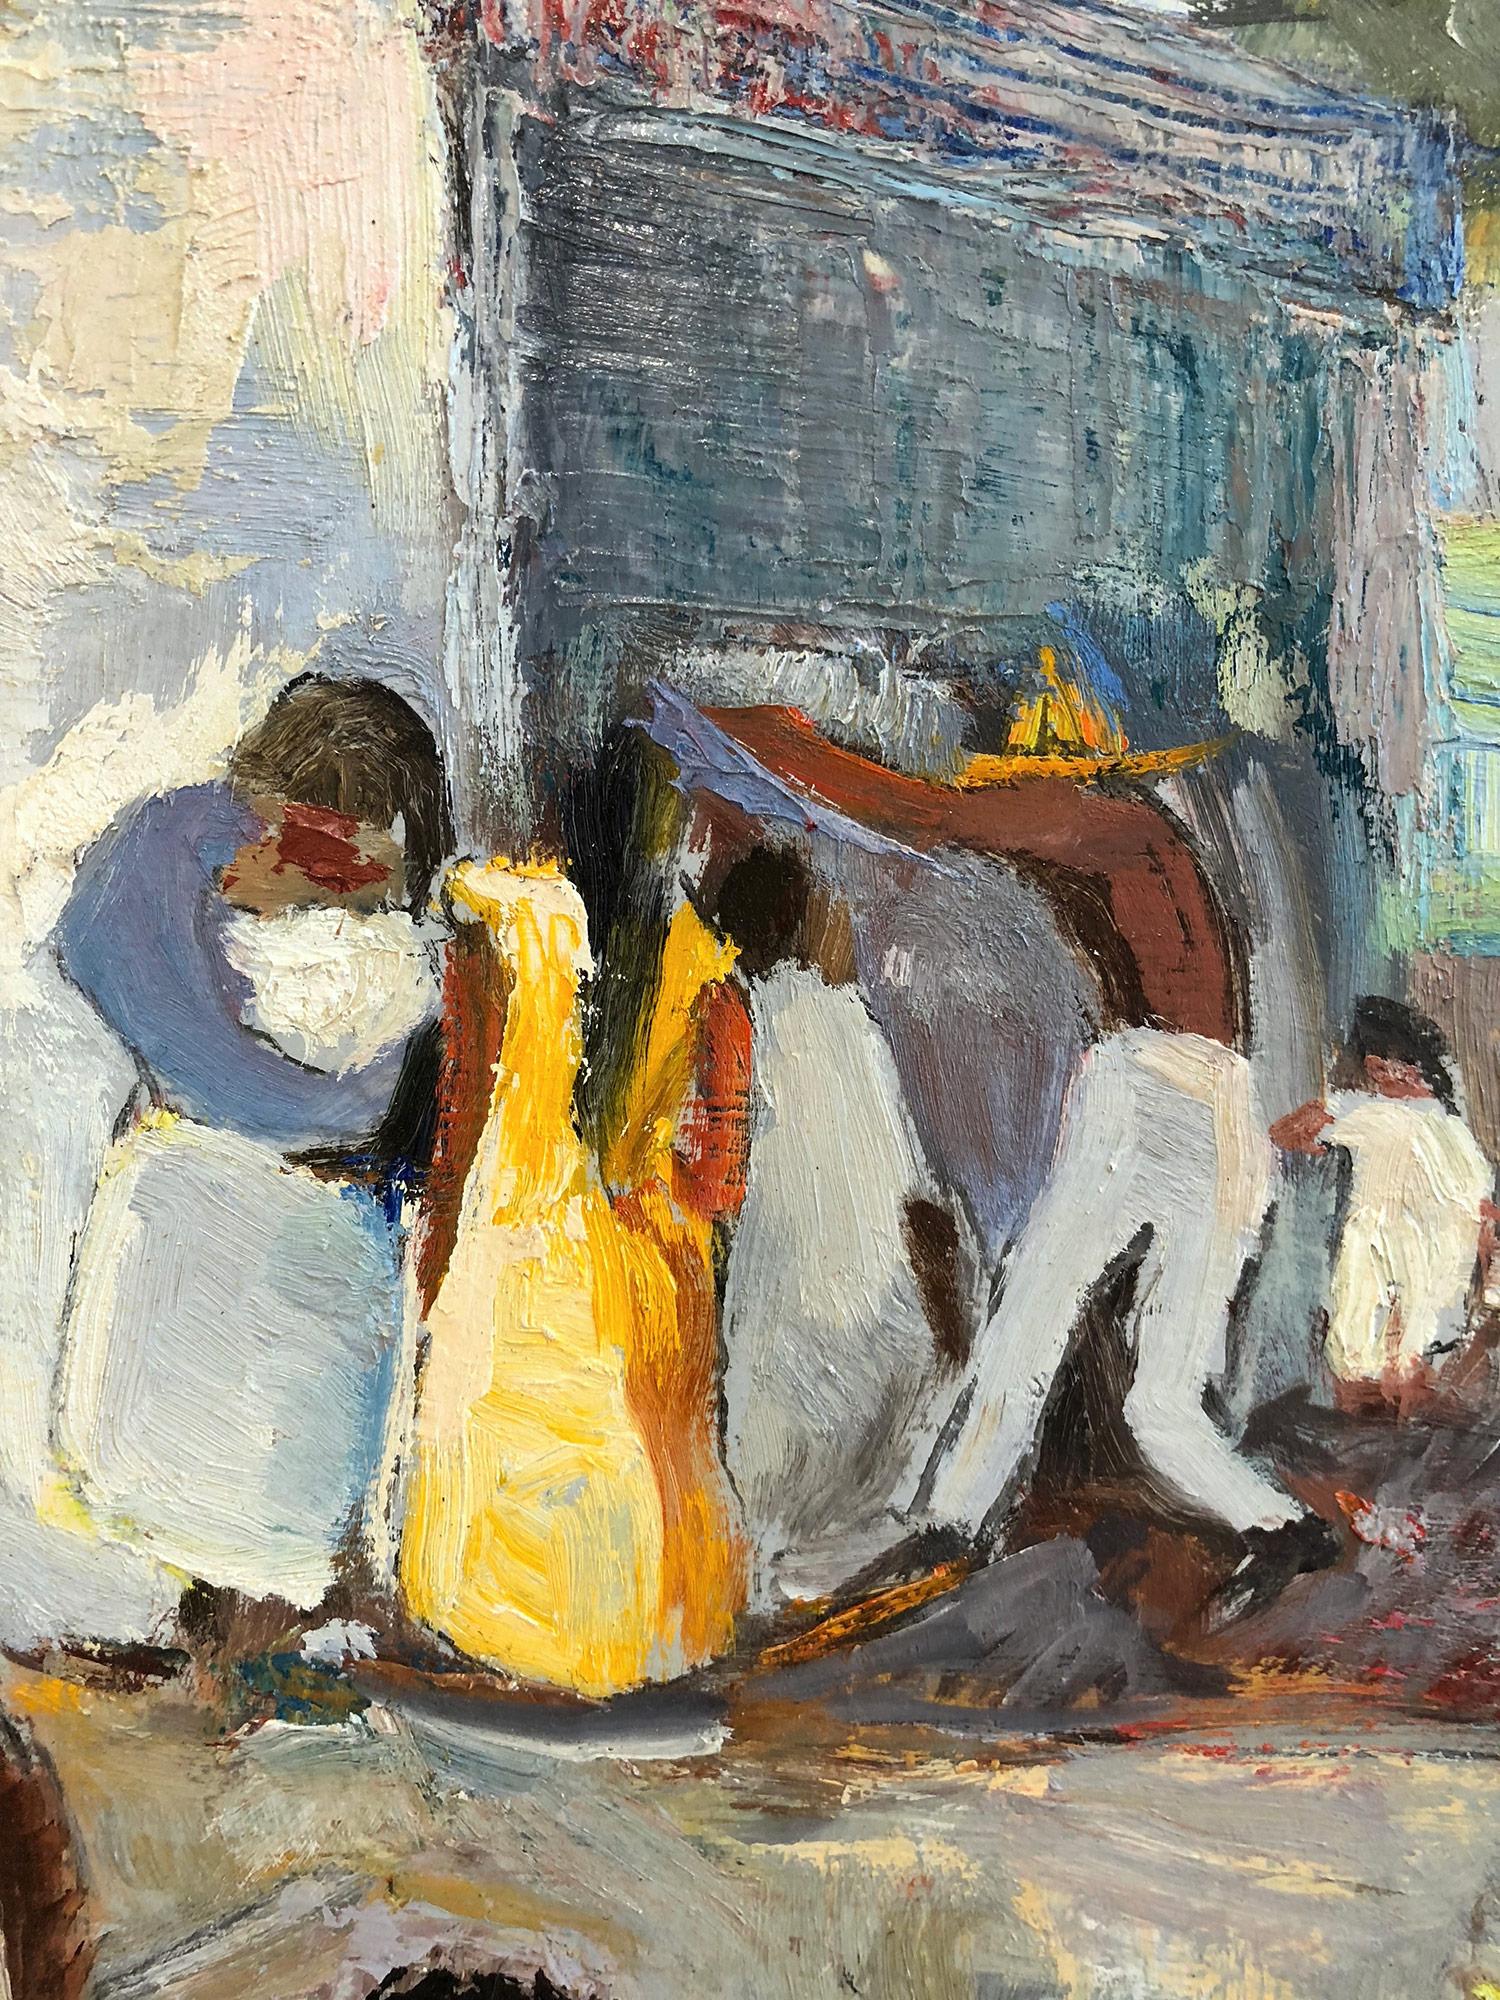 A strong modernist oil painting depicted in 1971 by Russian painter Michael Baxte. Mostly known for his abstracted figures on canvas or street scenes, this piece is a wonderful representation of his landscape paintings, with expressive use of color,